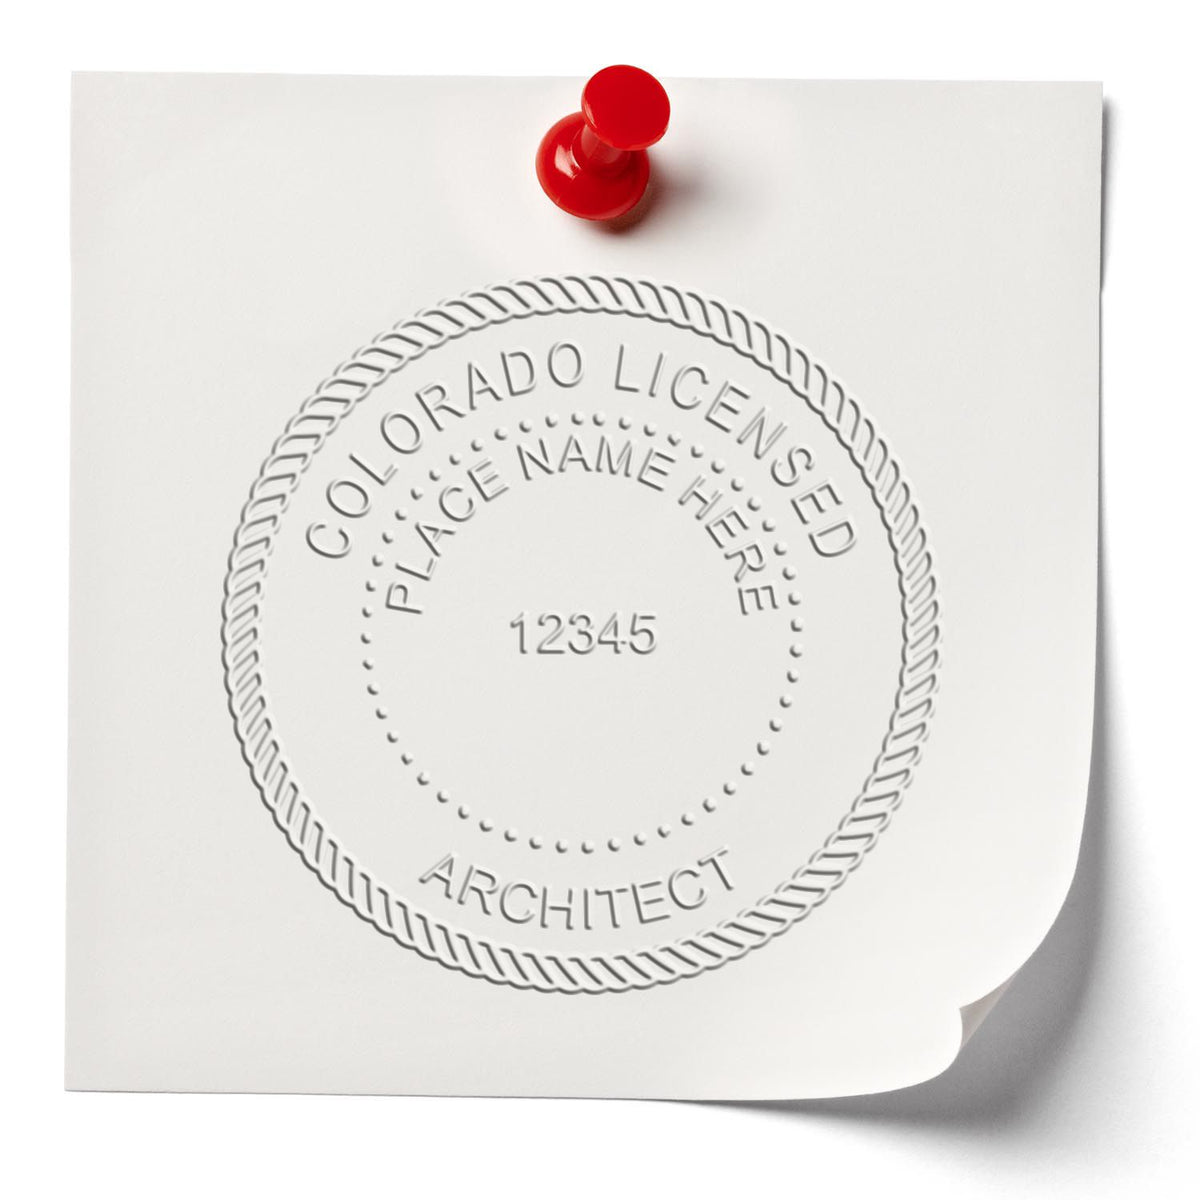 A stamped impression of the Handheld Colorado Architect Seal Embosser in this stylish lifestyle photo, setting the tone for a unique and personalized product.